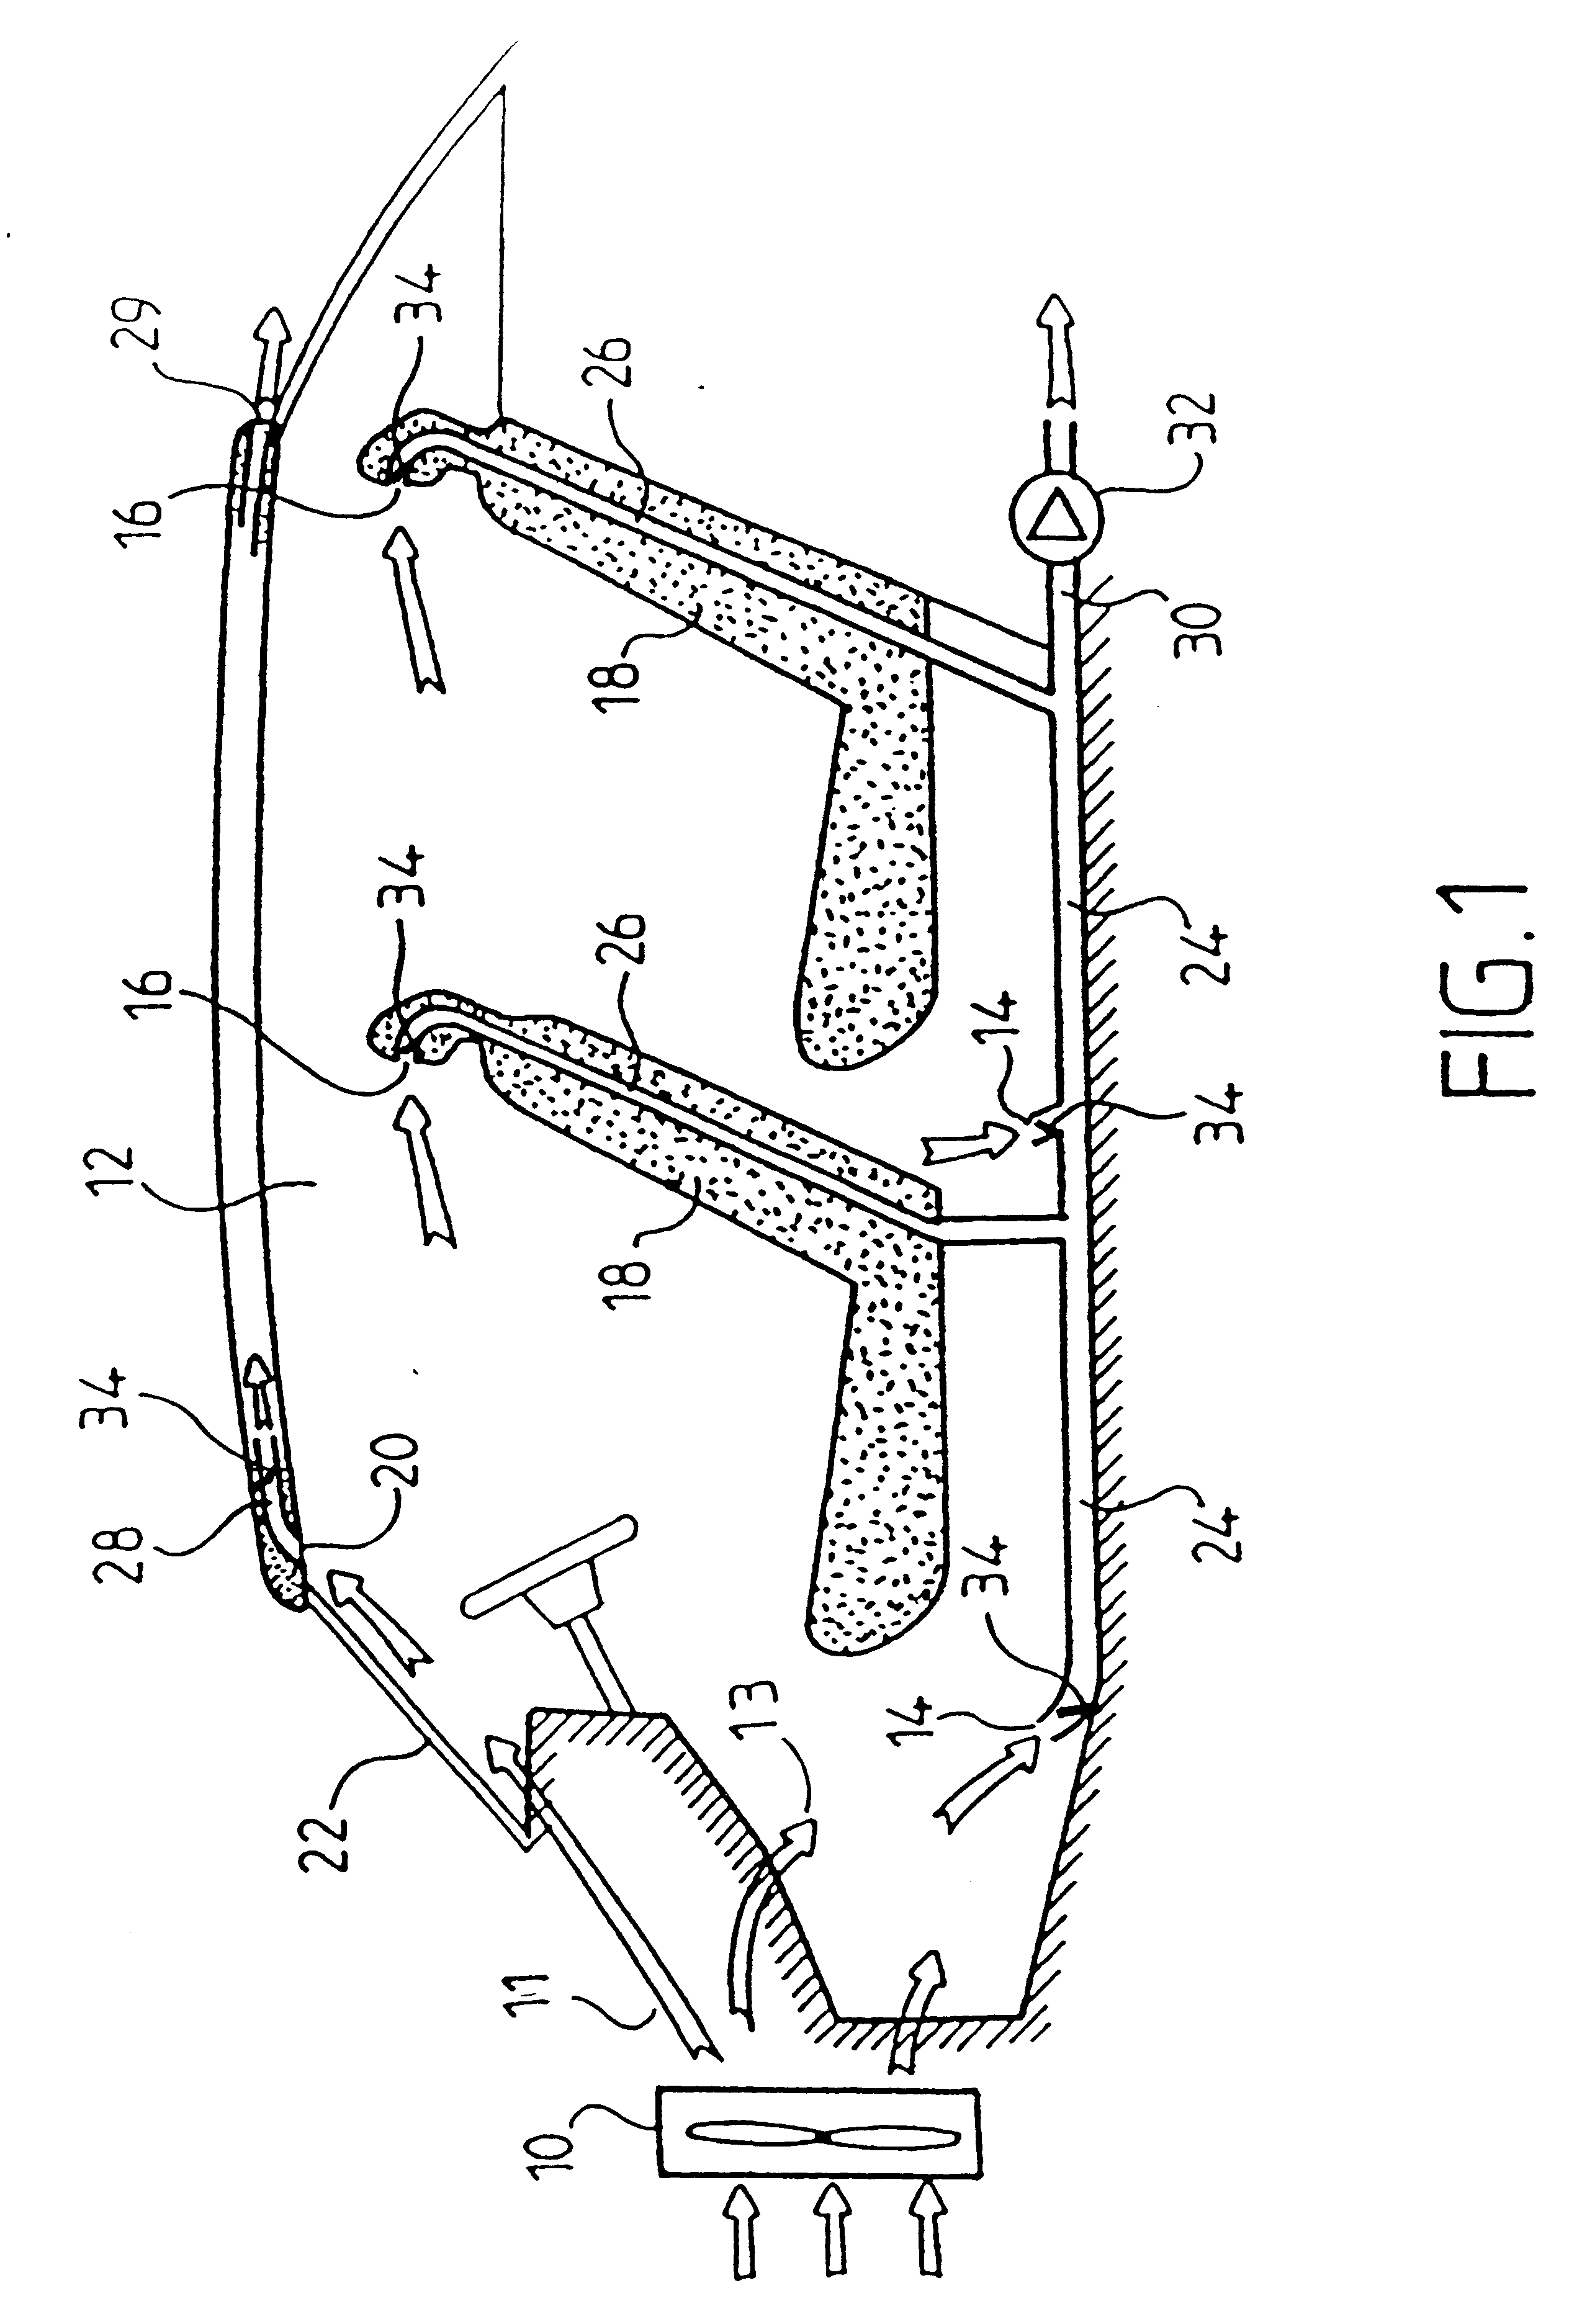 Installation for heating and/or ventilating the passenger compartment of a vehicle employing selective extraction of air